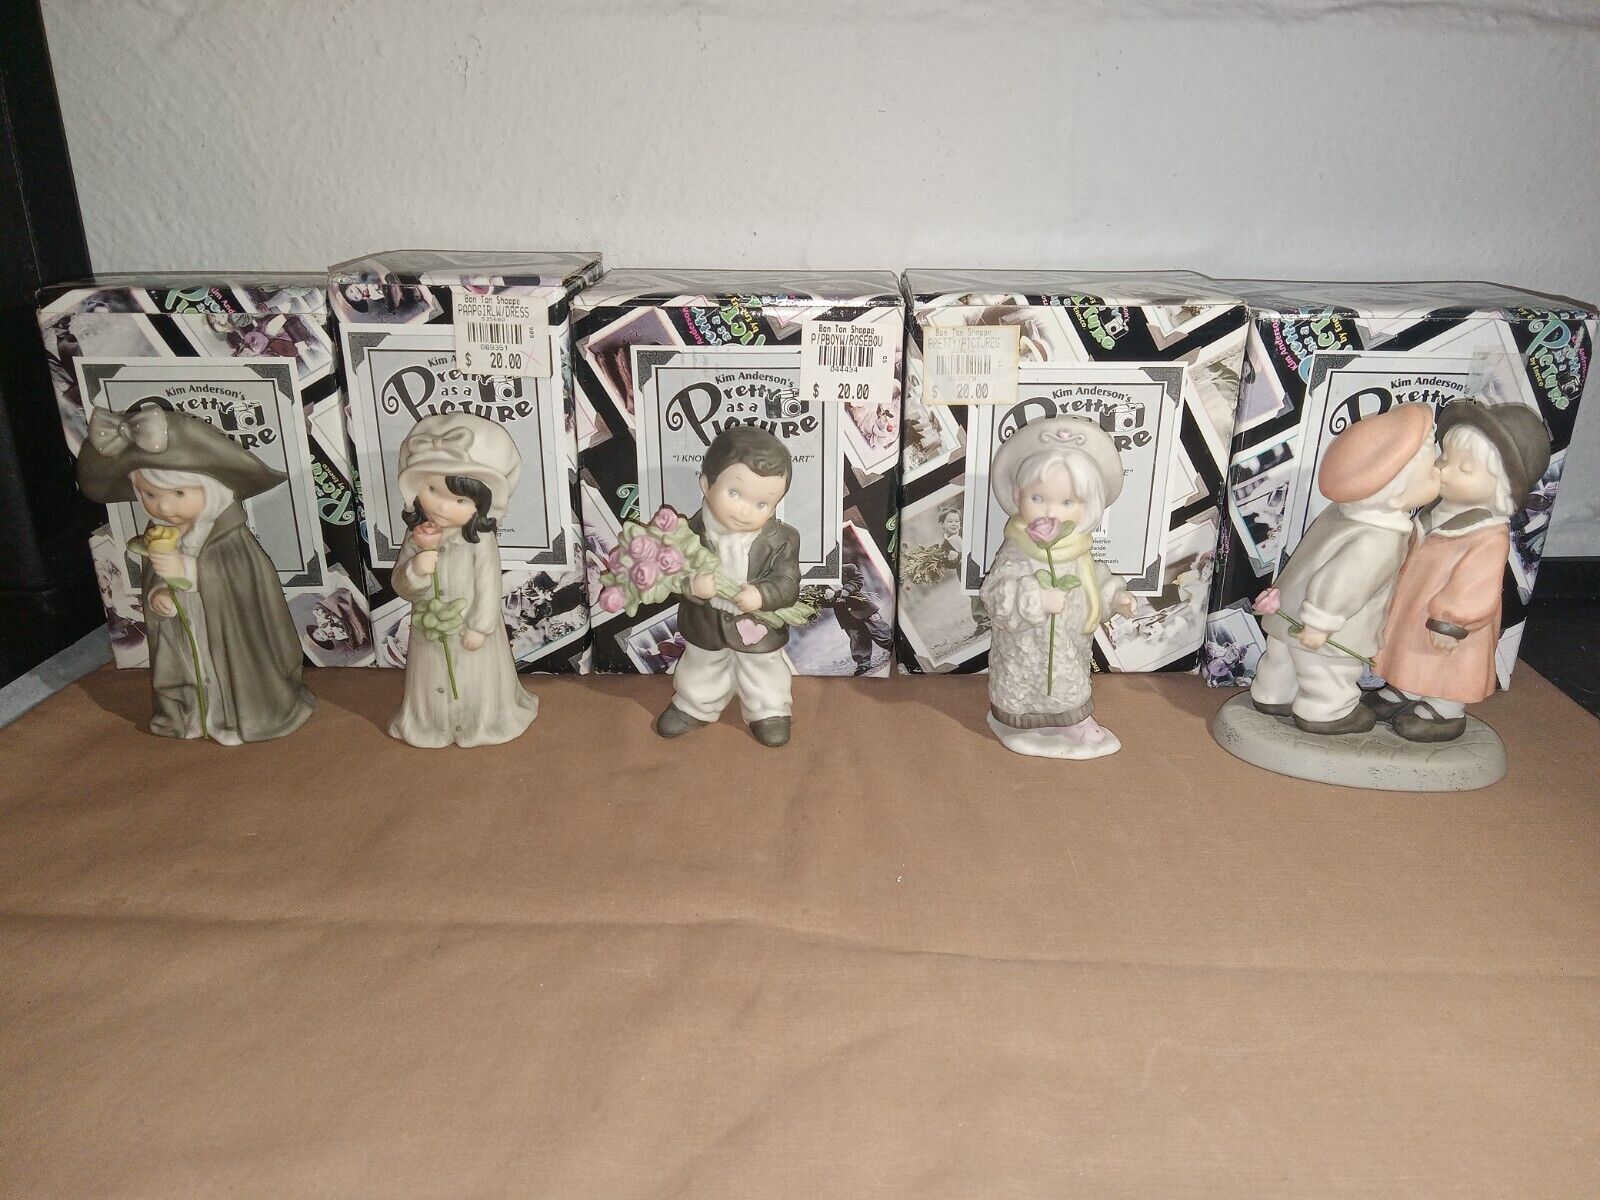 Lot of 5 Pretty as a Picture Figurines Kim Anderson